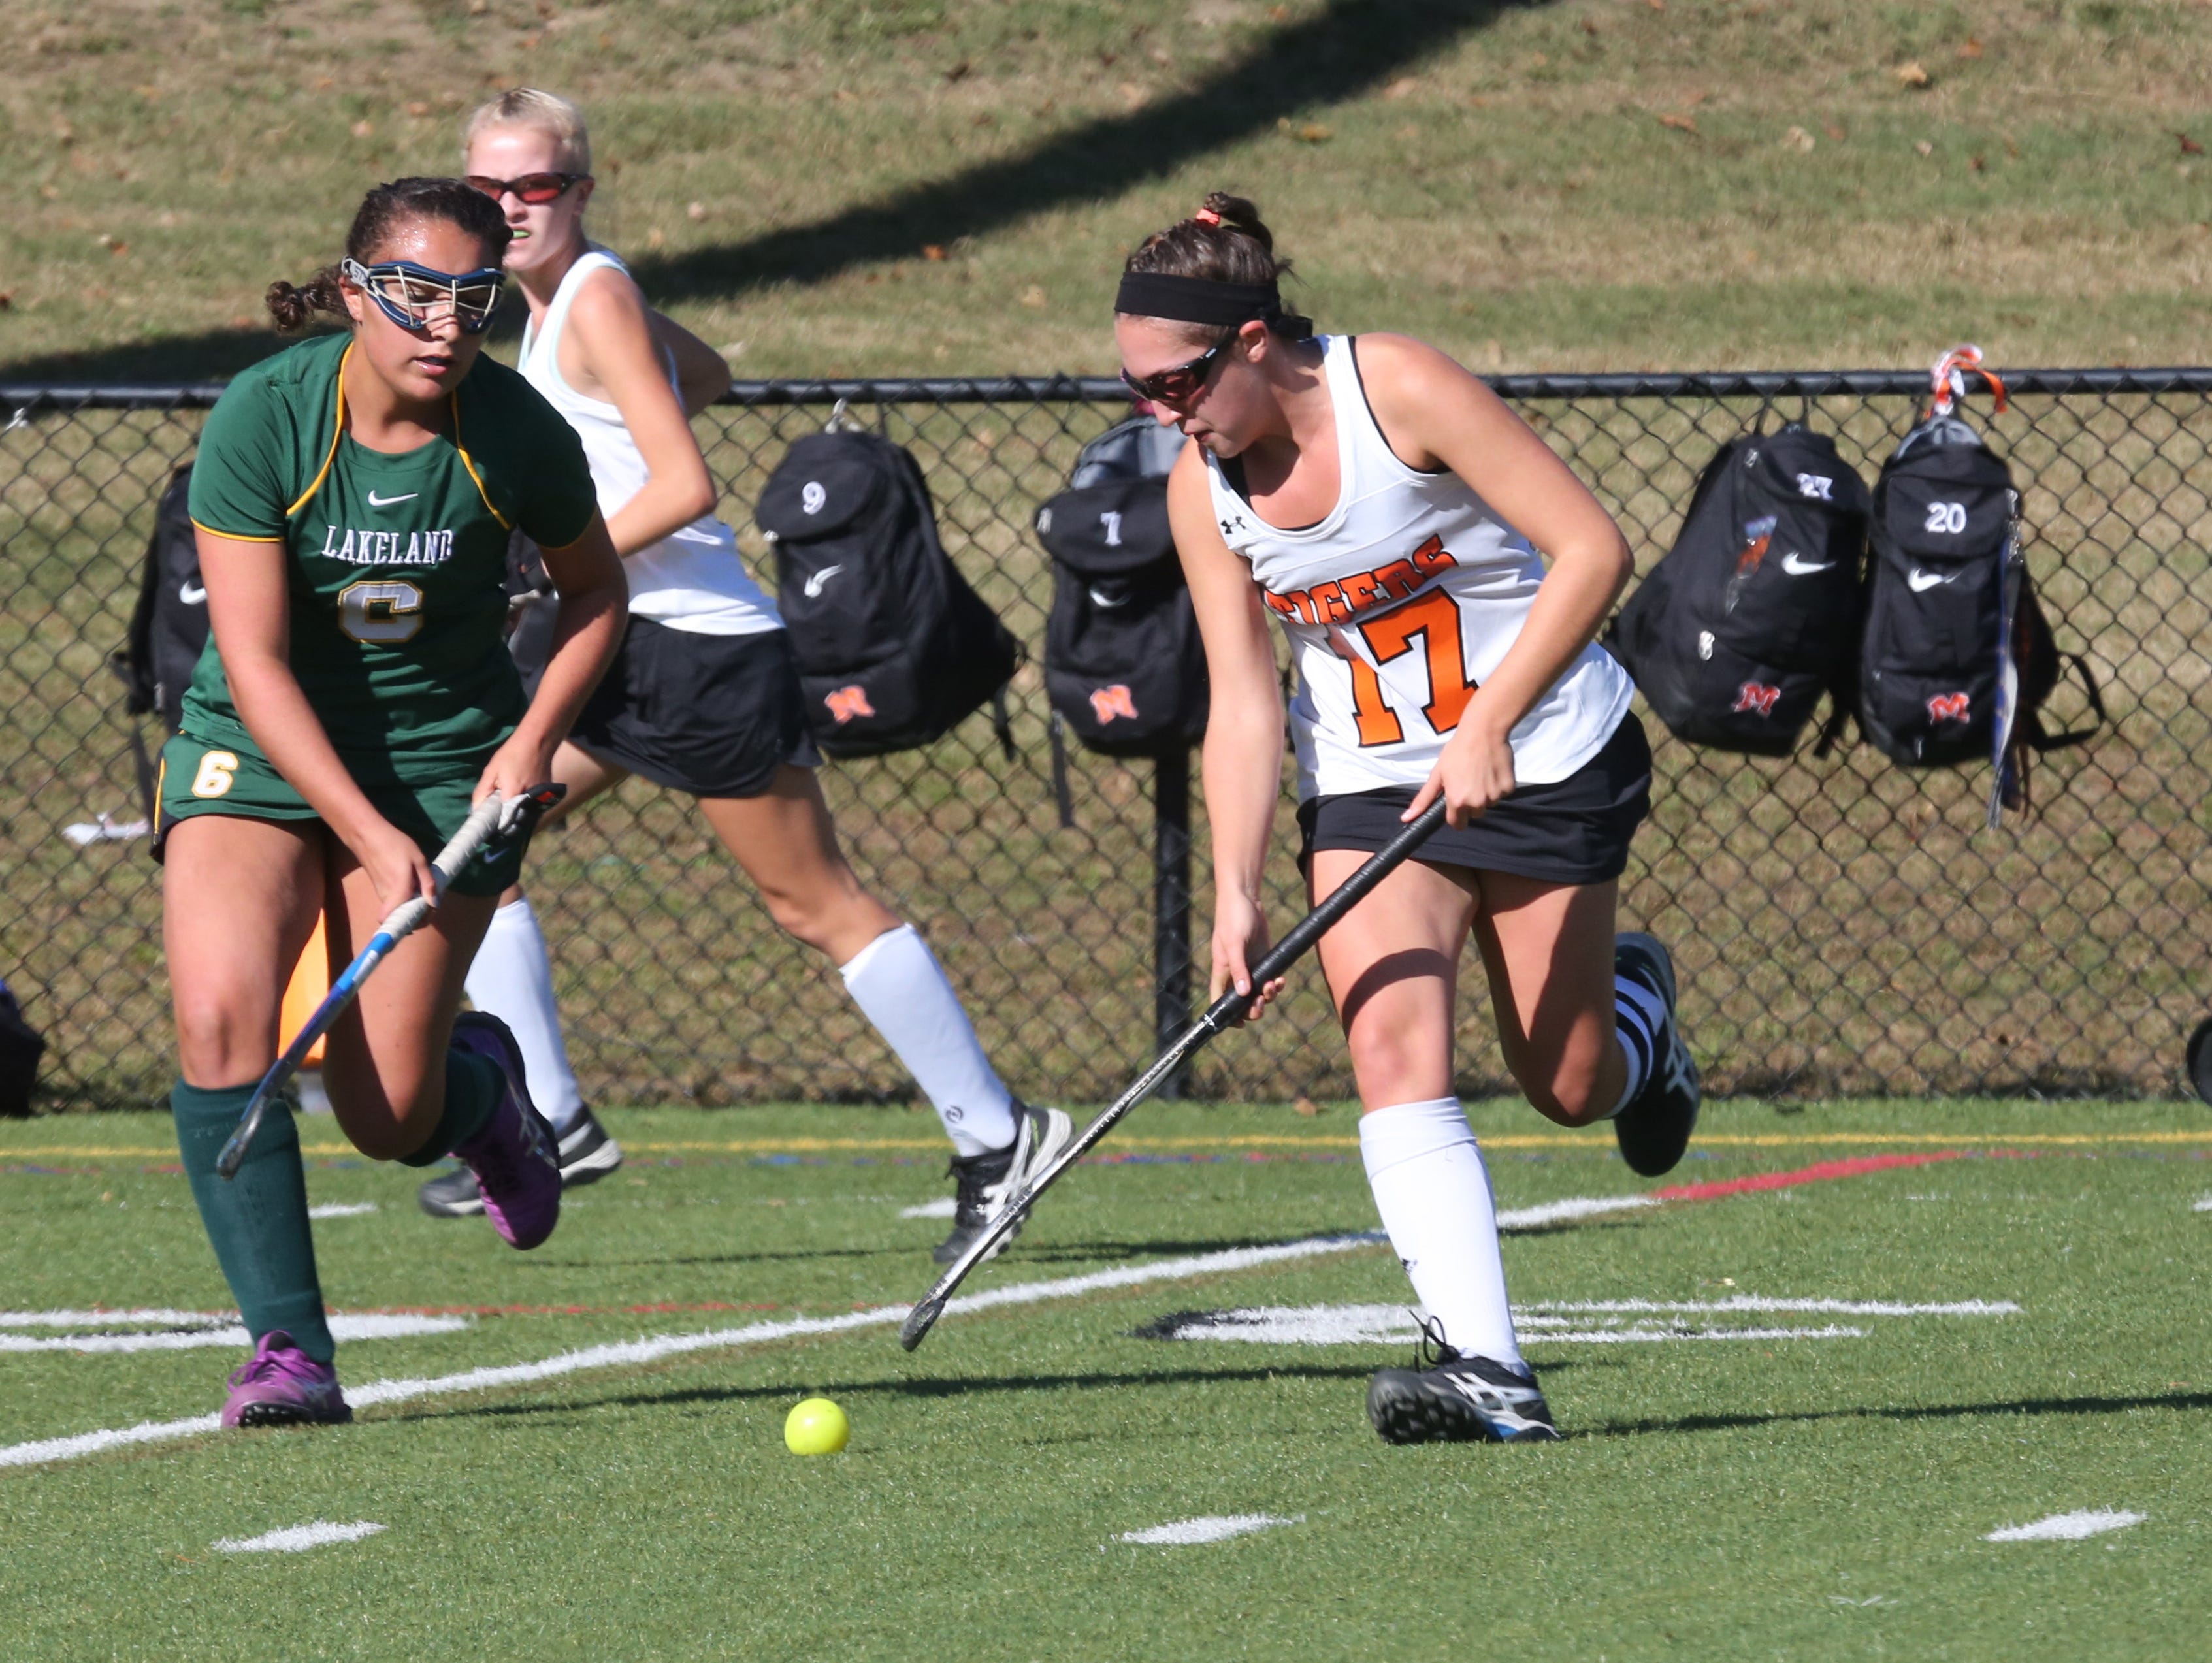 Lakeland's Emily Kness, left, and Mamaroneck's Paige Danehy chase down a ball during their game in Mamaroneck Saturday.